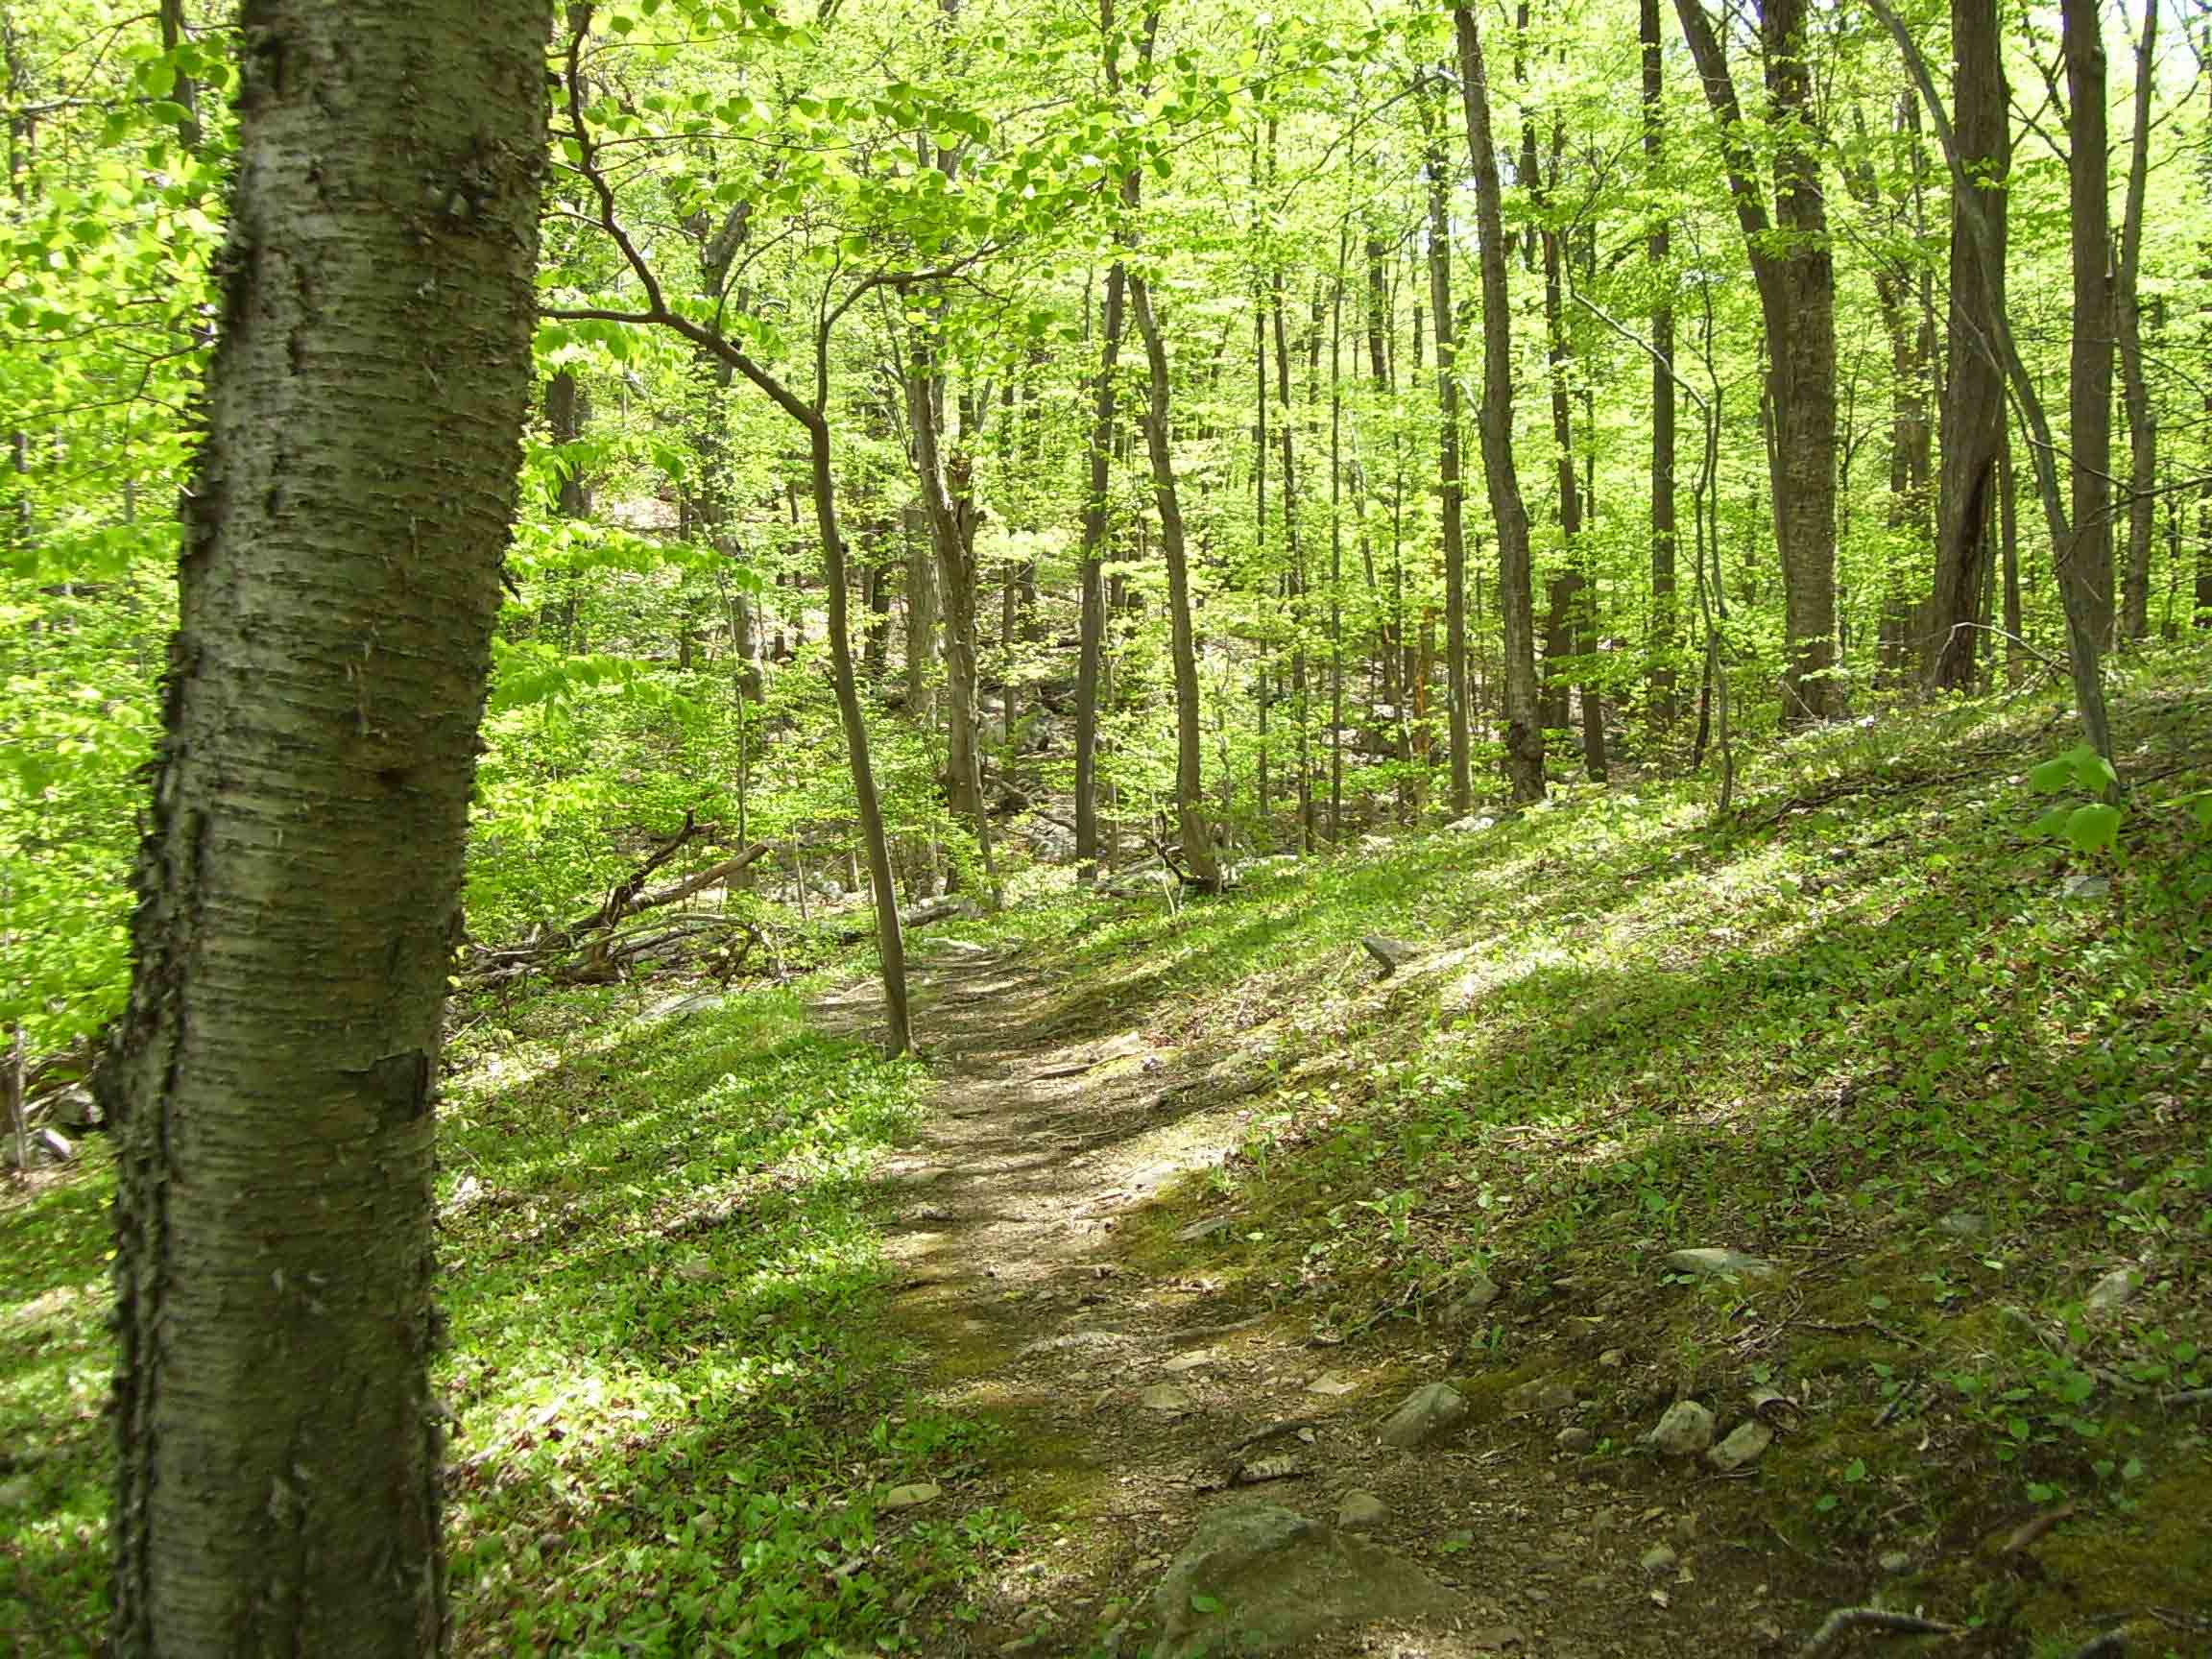 Typical terrain as found throughout most of this section in Fahnestock State Park.  Courtesy dlcul@conncoll.edu